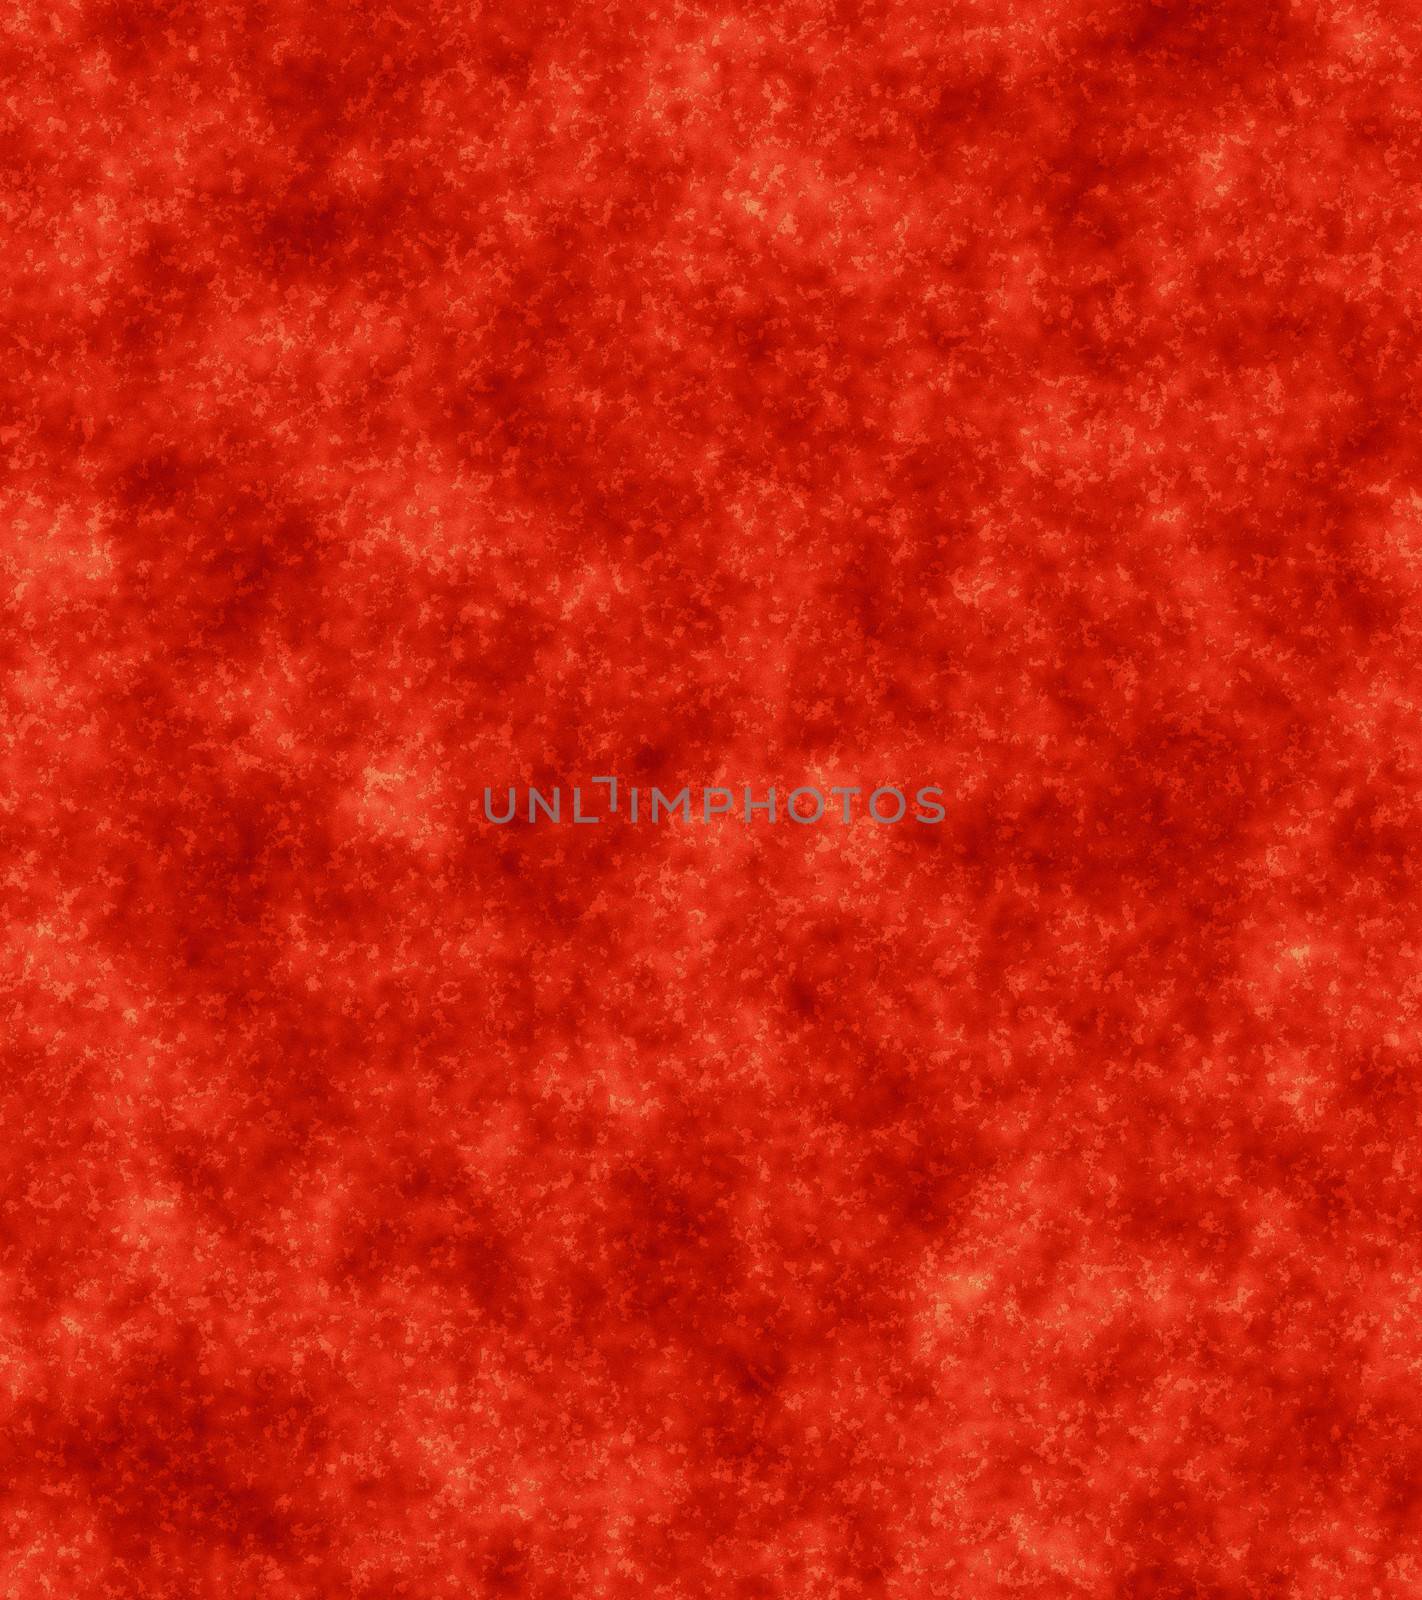 old, grunge background texture in red